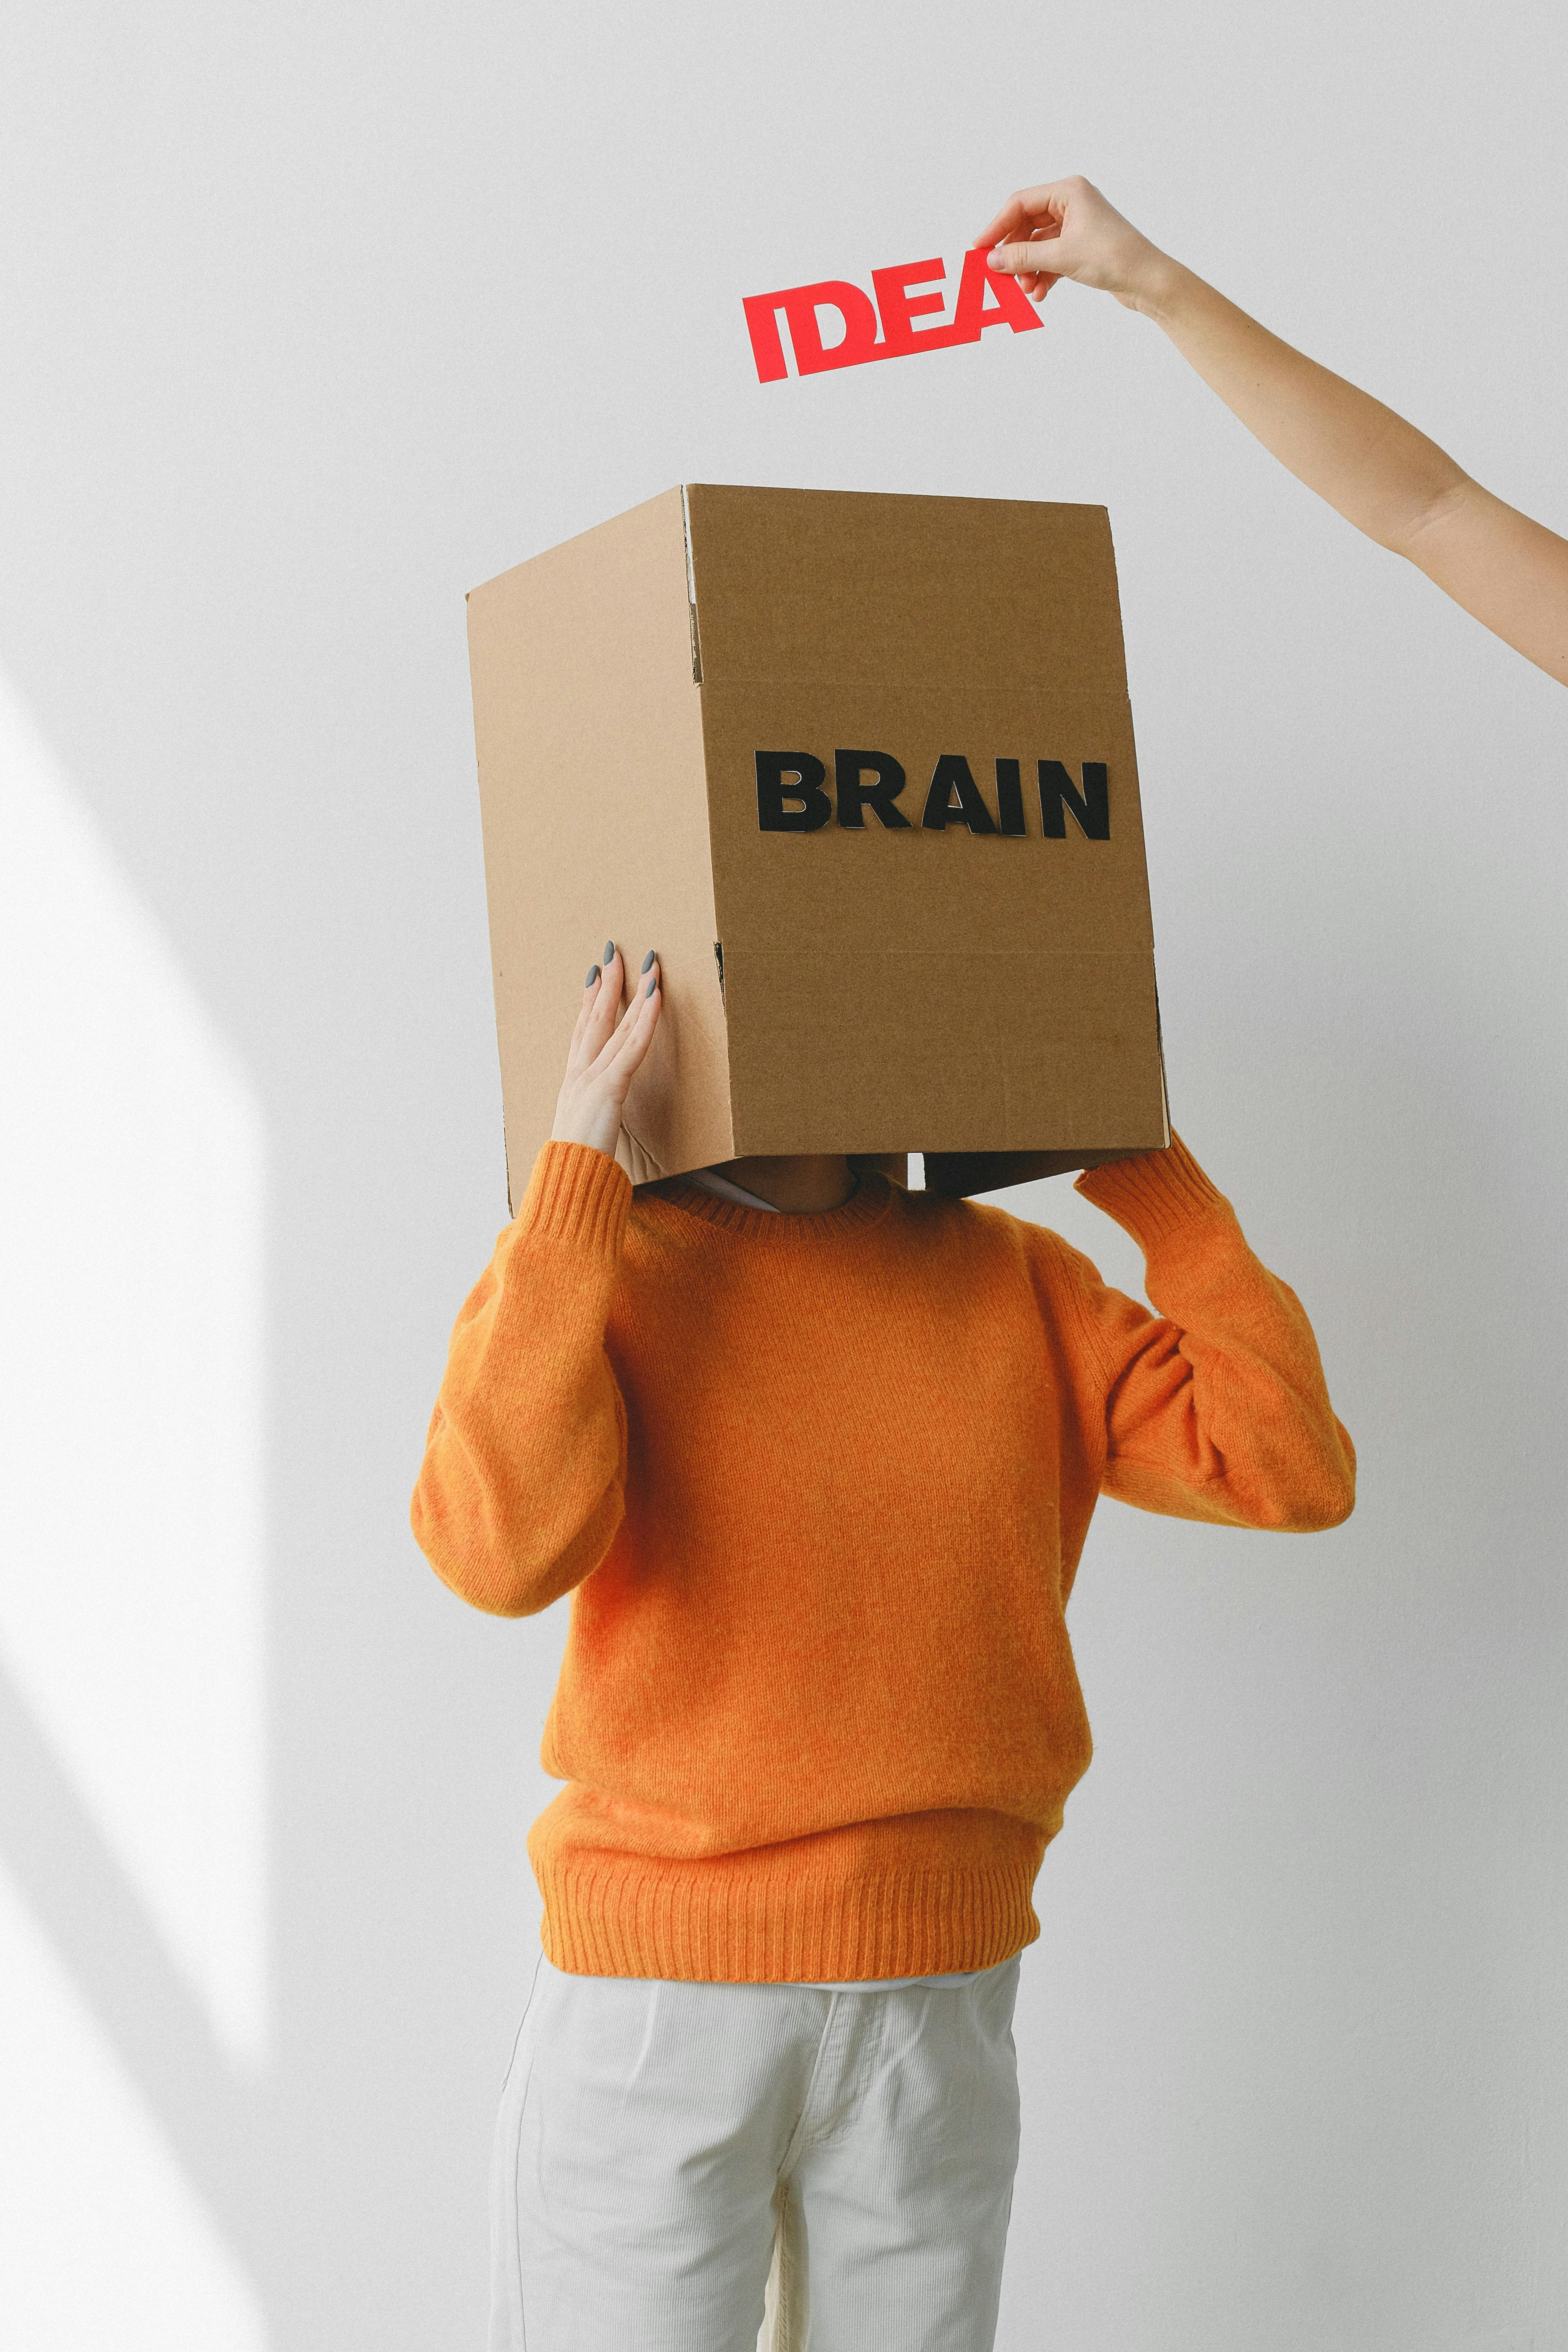 Cardboard upside down with inscription "Brain" and sign "Idea" above it